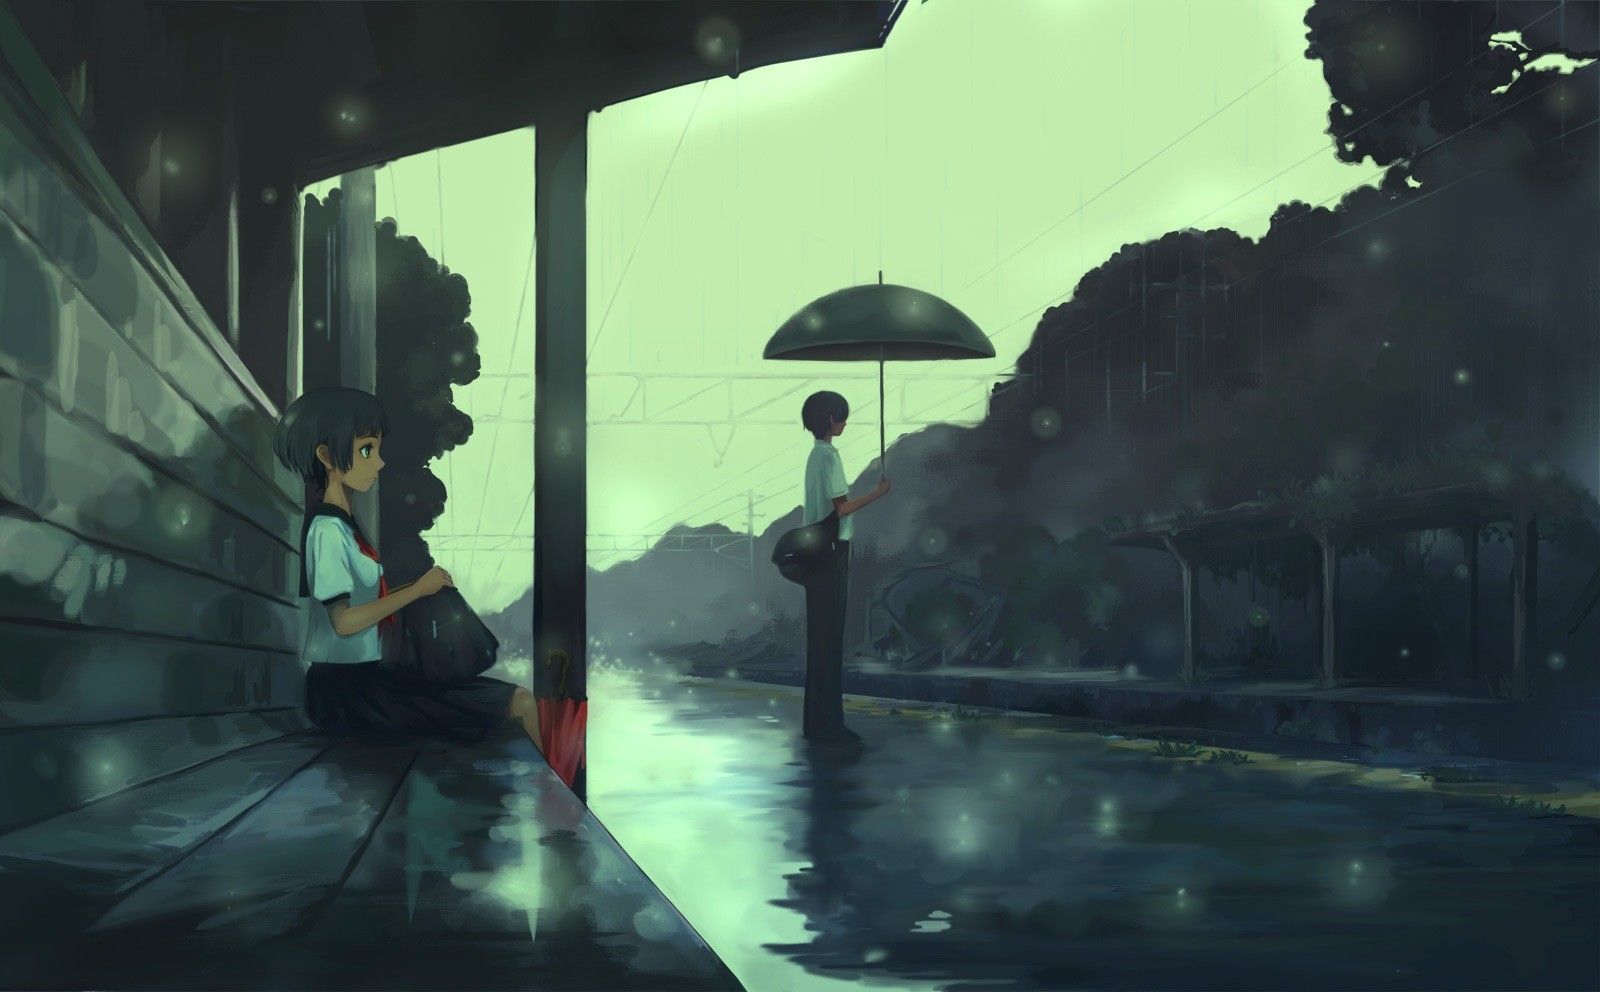 Rainy Anime Wallpapers - Wallpaper Cave